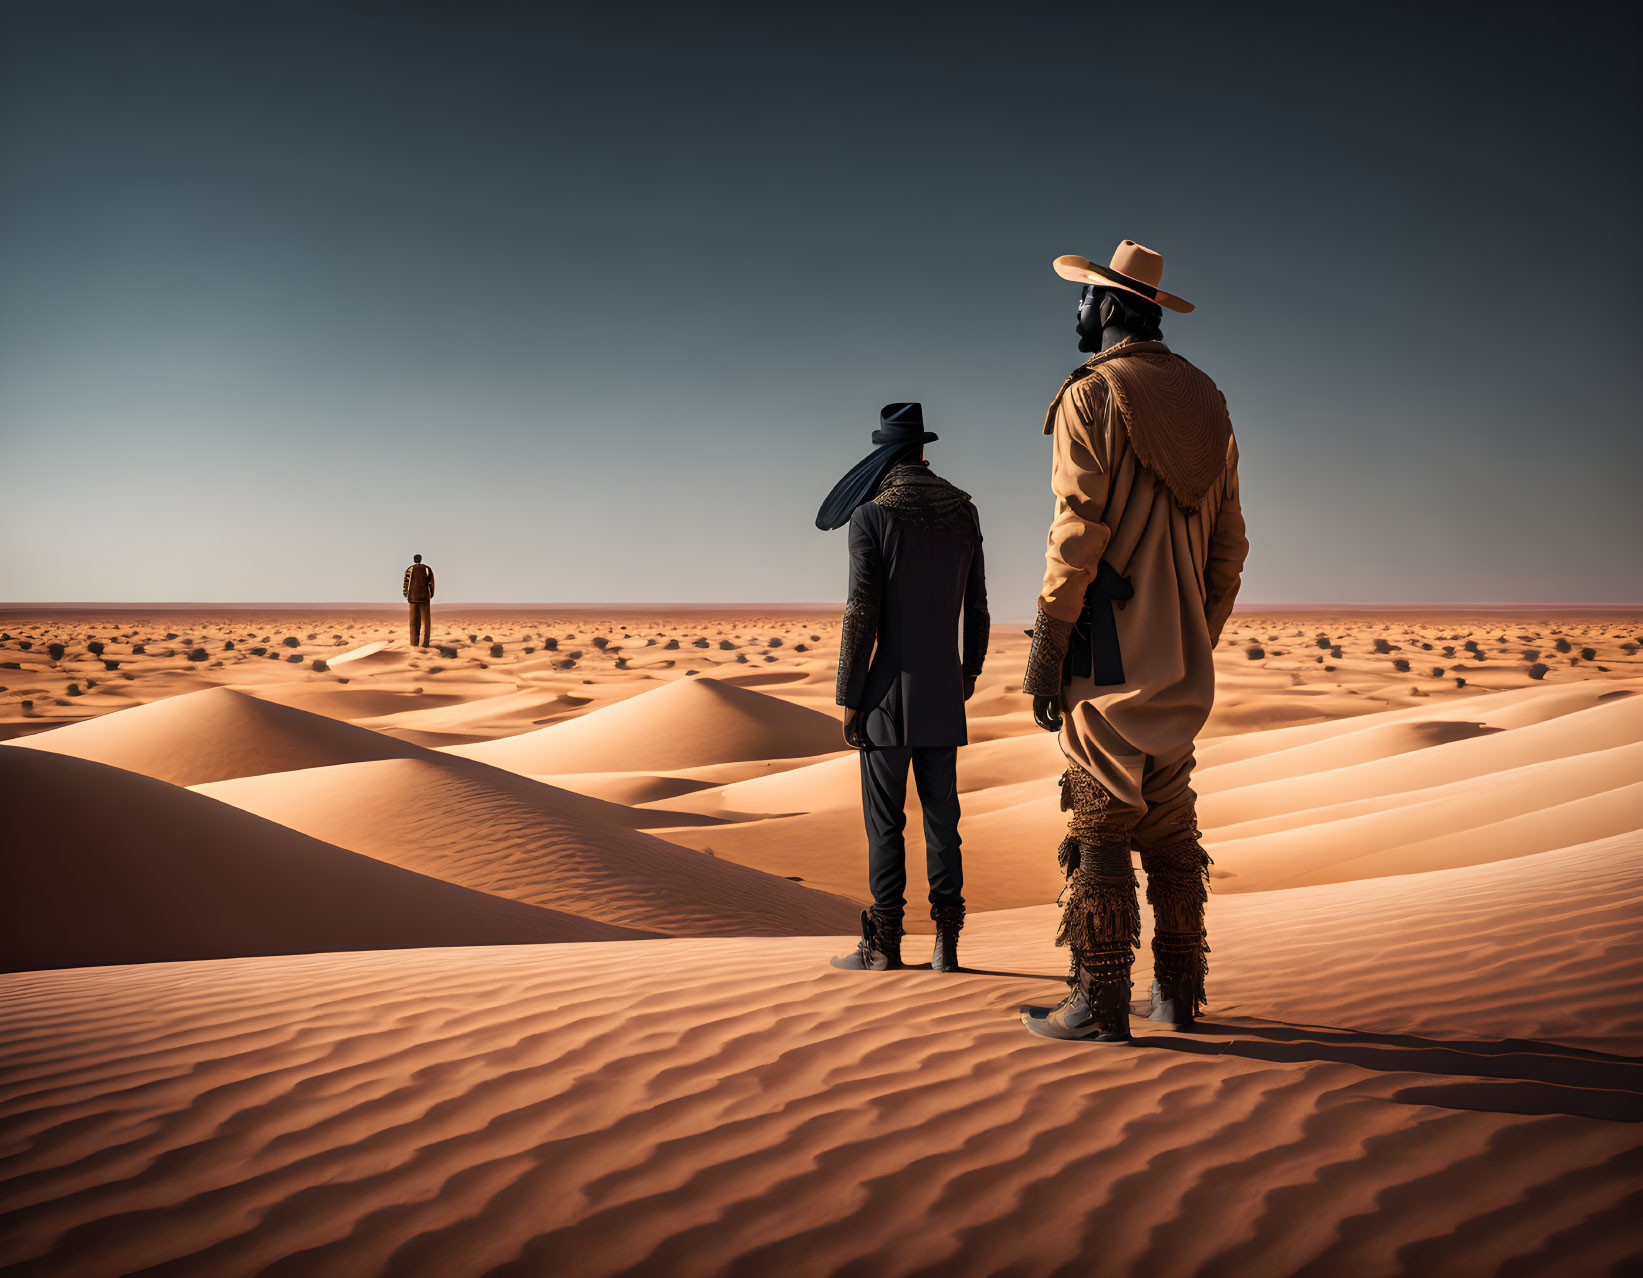 Cowboy hats and dusters in desert landscape with distant figure.